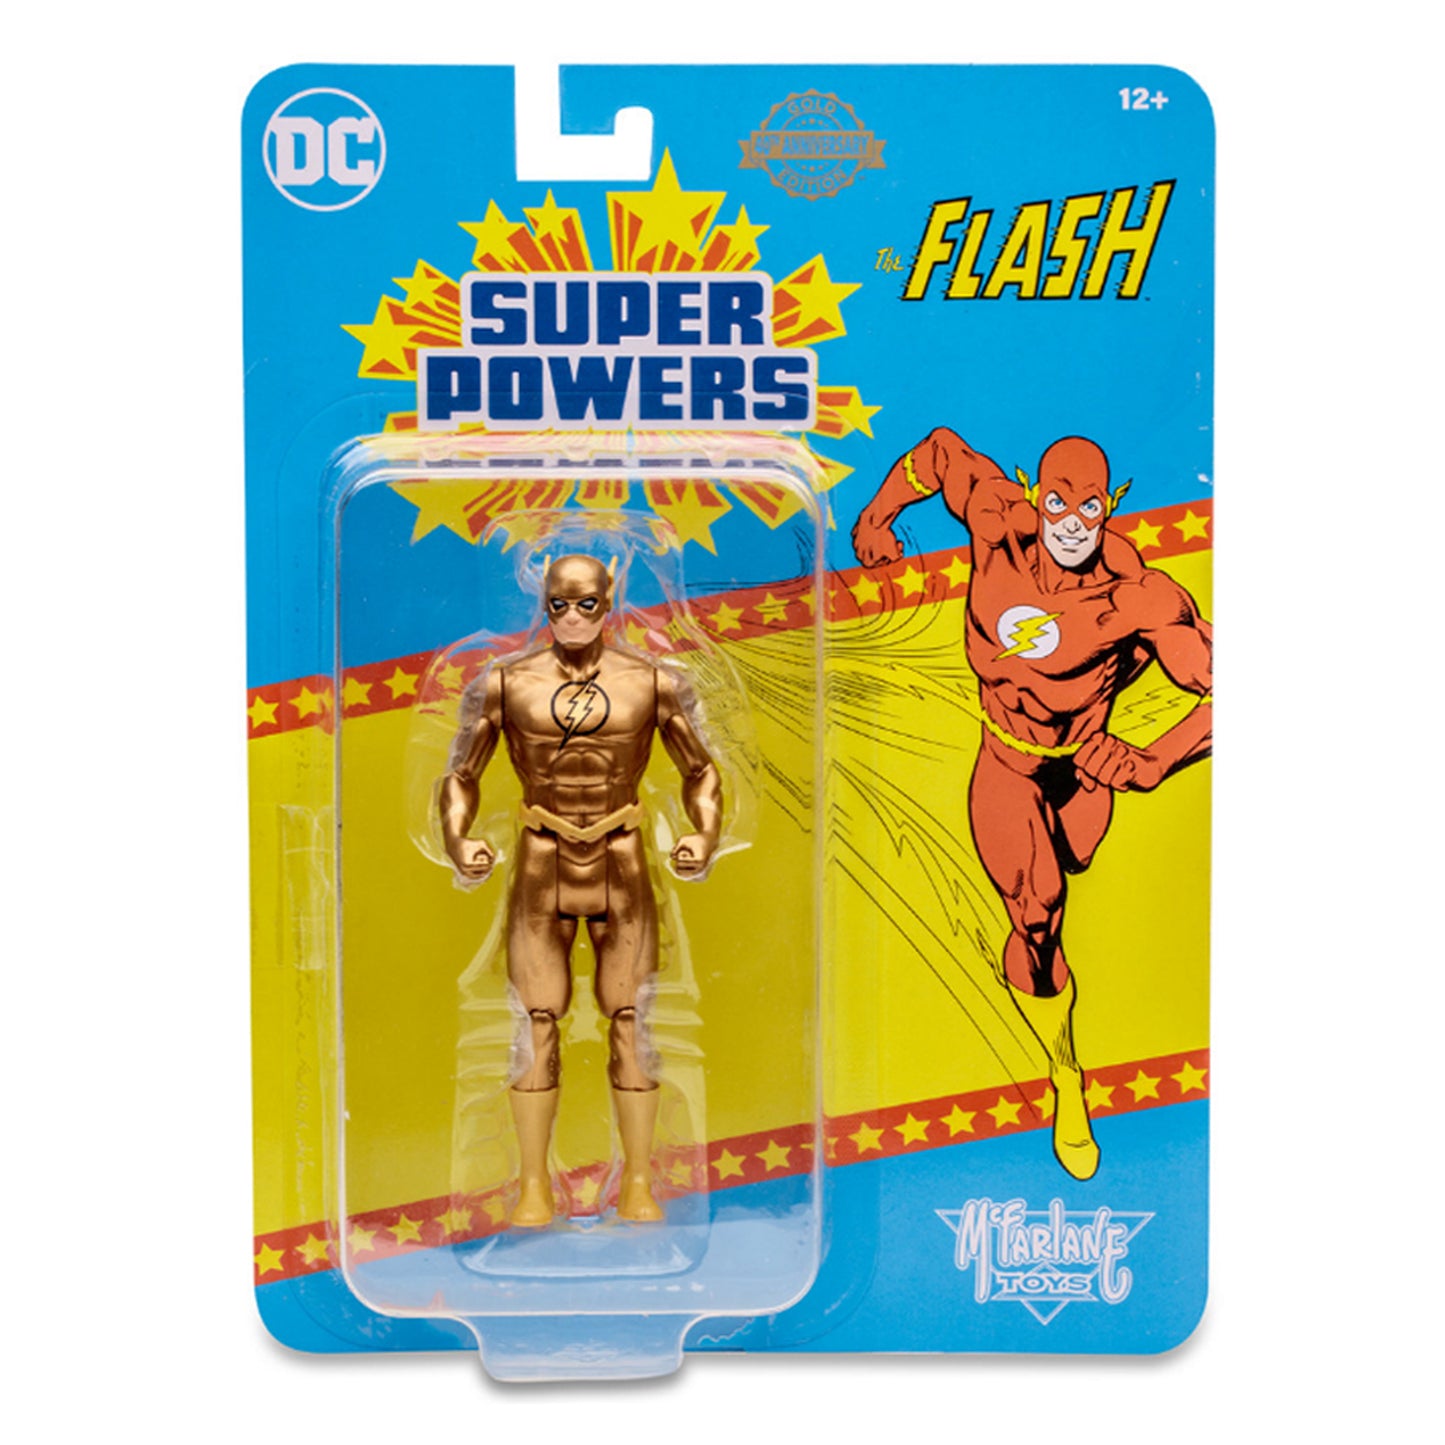 DC Super Powers The Flash (Gold Edition)